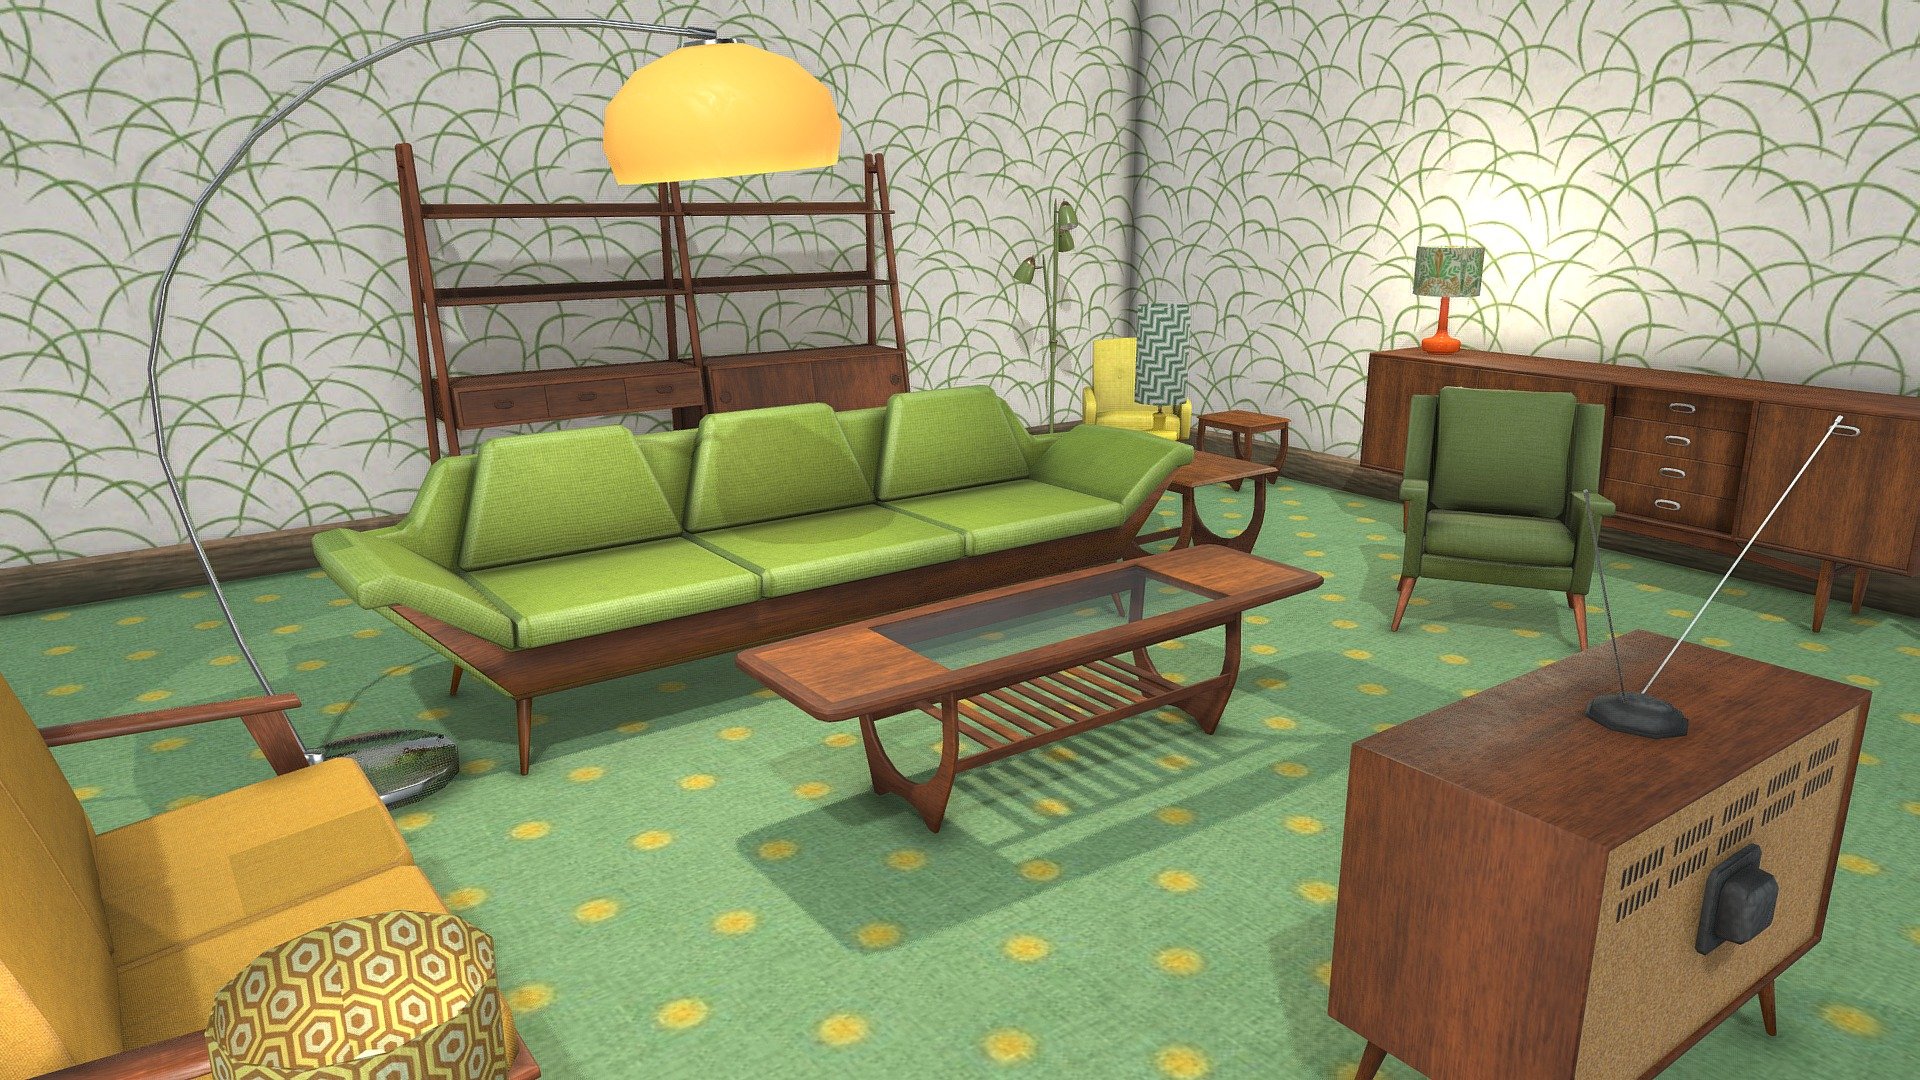 Low Poly Furniture Pack winner of the #StoreFurnitureChallenge.
A selection of 15 typical mid-century, 60s and 70s style retro living room furniture.

Included in this pack are: 




2 sofas

2 armchairs

A coffee table

Set of 3 nesting tables

3 Floor Lamps

3 Table Lamps

A bookshelf

A sideboard

And a TV


Fully Textured
All items have full game ready PBR textures. Either in 2048x2048 or 1024x1024 depending on item size.


Low Poly
Largest item has just under 2000 triangles, the average is about 1000 triangles. The full list of poly counts can be found in the annotations on the interactive 3D Model.


Update
I have added a zip file with all the textures 2 .blend files 1 for just the furniture, and the other is this scene with a subsurface shader applied to lamp shades and lights parented to the lamps.
FBX files now added.



Modelled in Blender and textured in Substance Painter 3d model